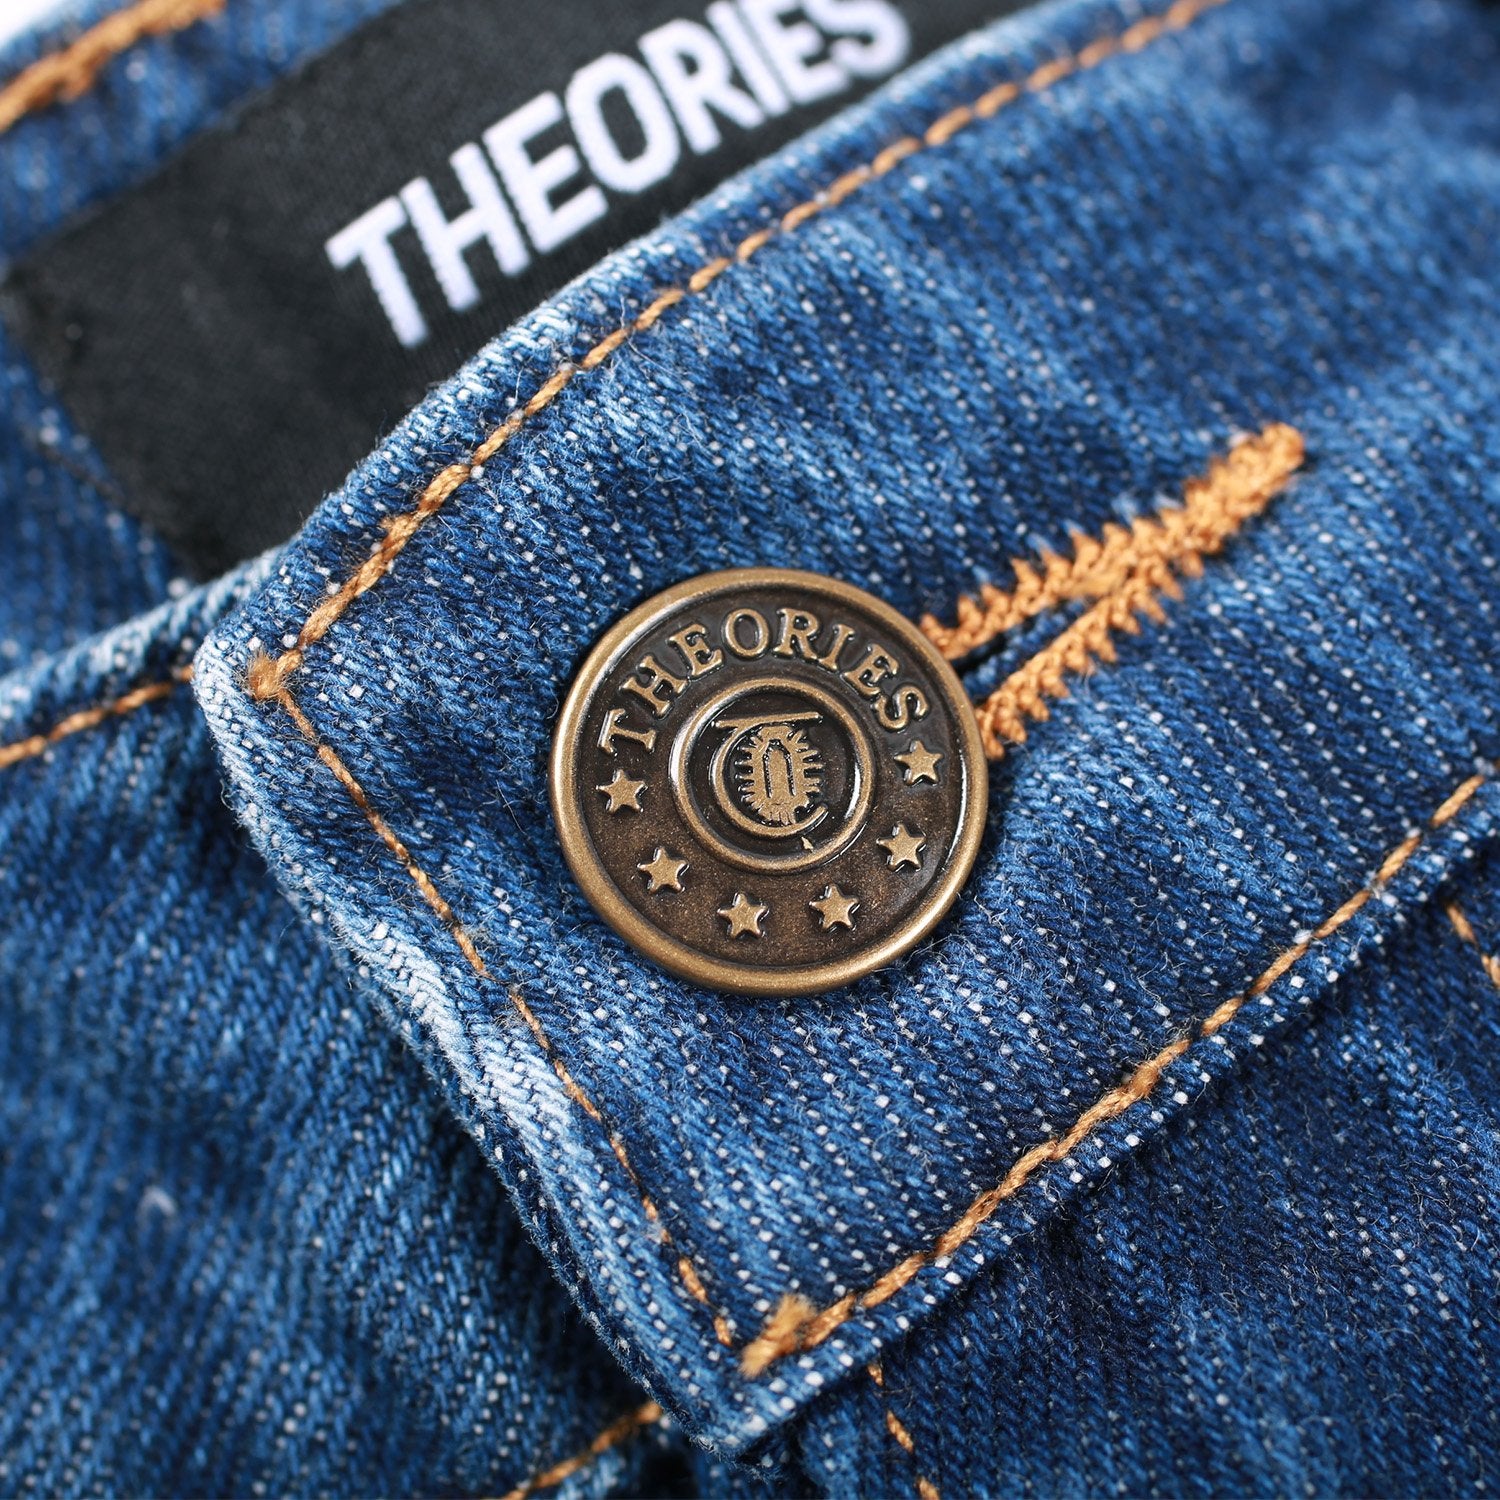 Theories Plaza Jeans Washed Blue